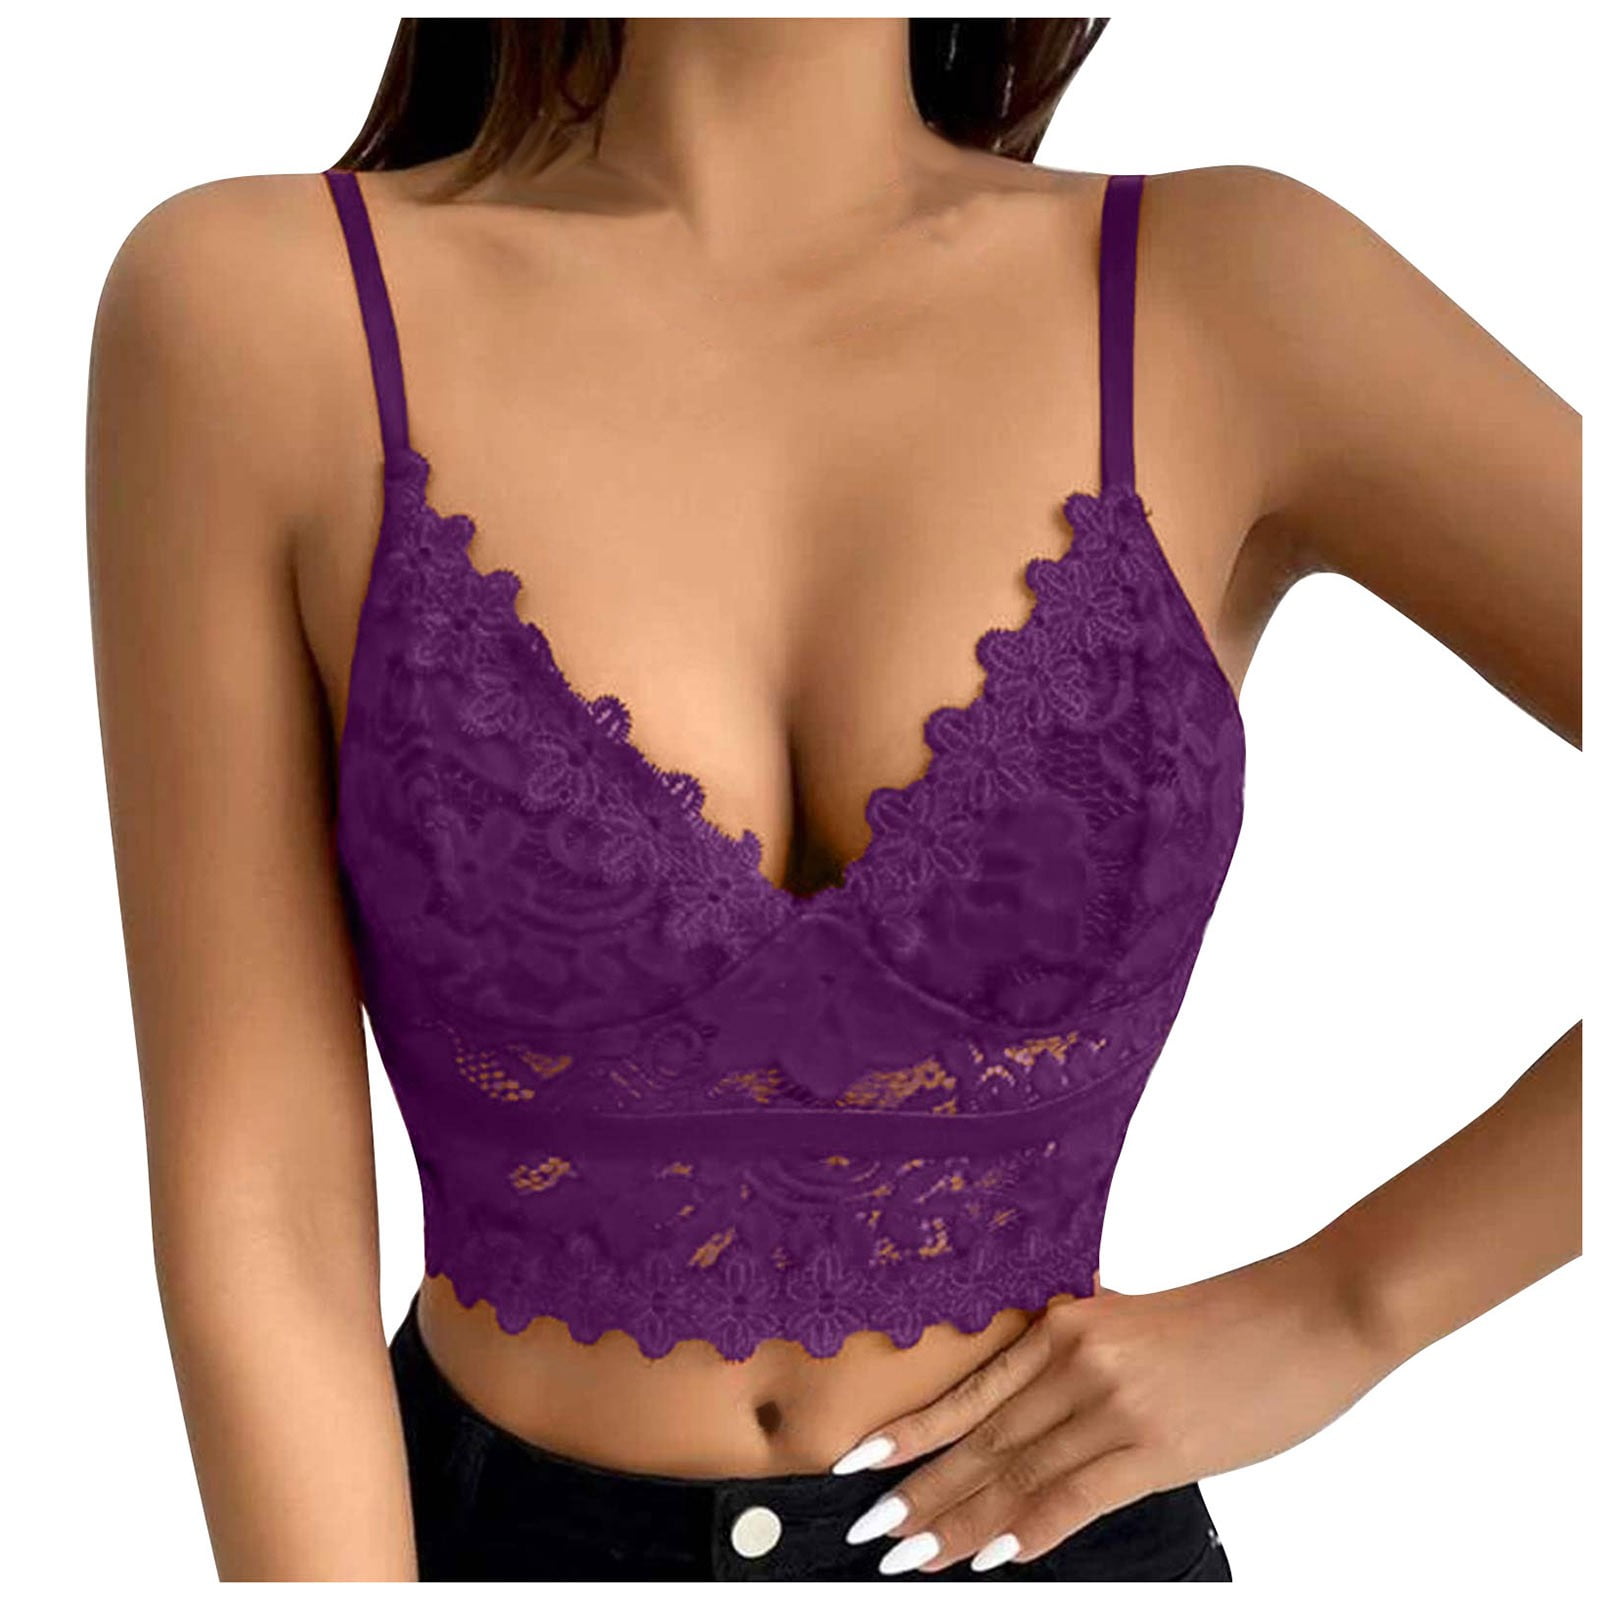 Knosfe Cami Lace Plus Size Wireless Bra for Women Comfort Support Bralette  Medium 